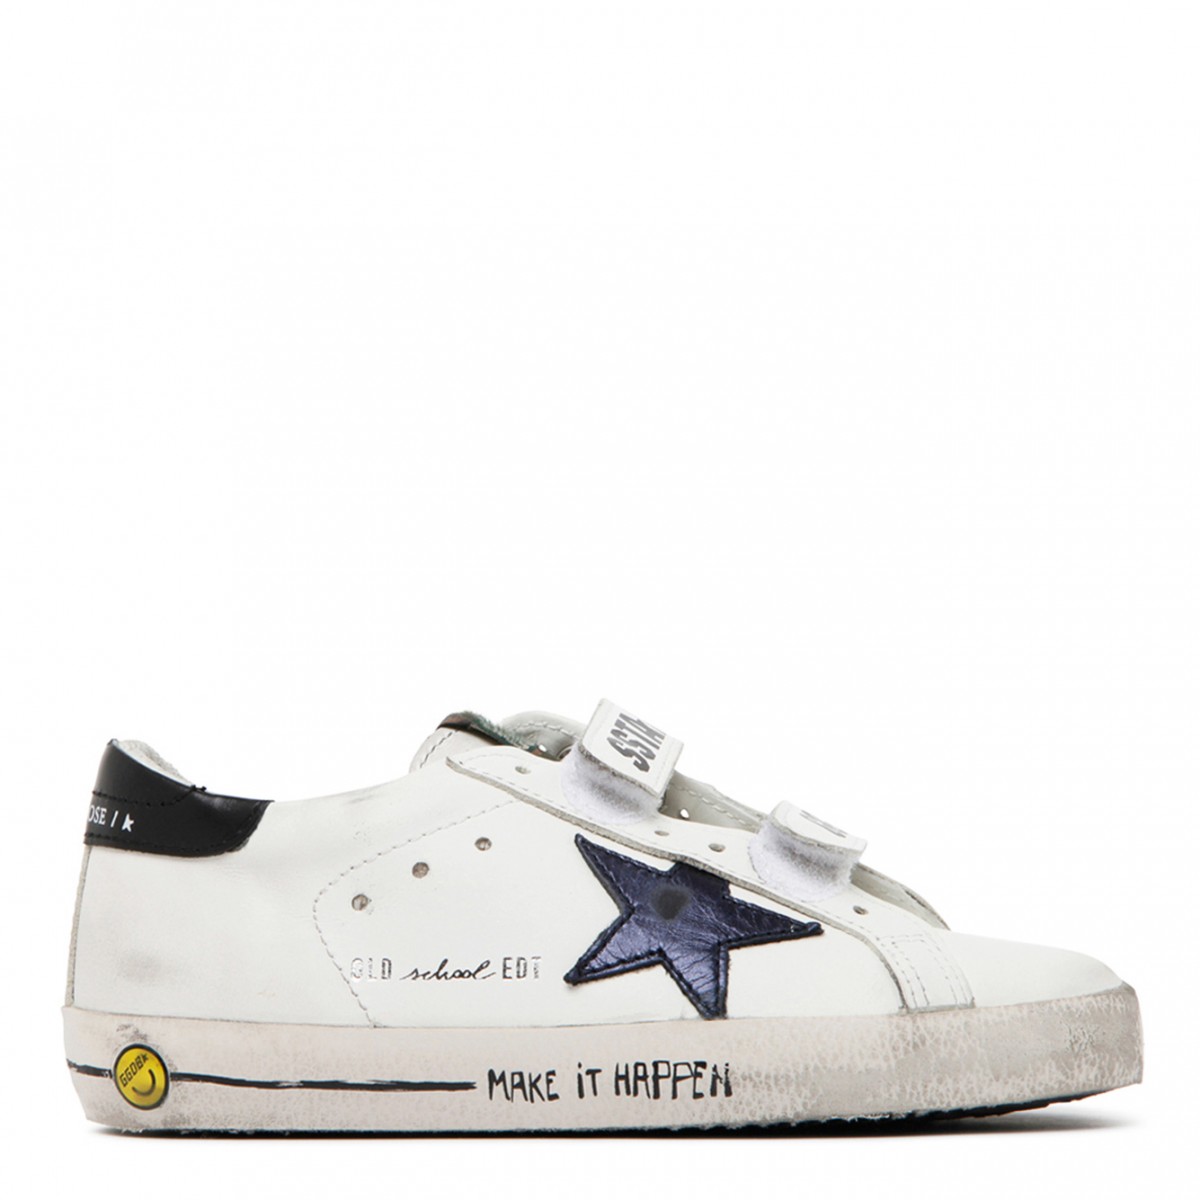 Golden Goose Kids Old School White, Navy and Black Calf Leather Touch Strap Sneakers.